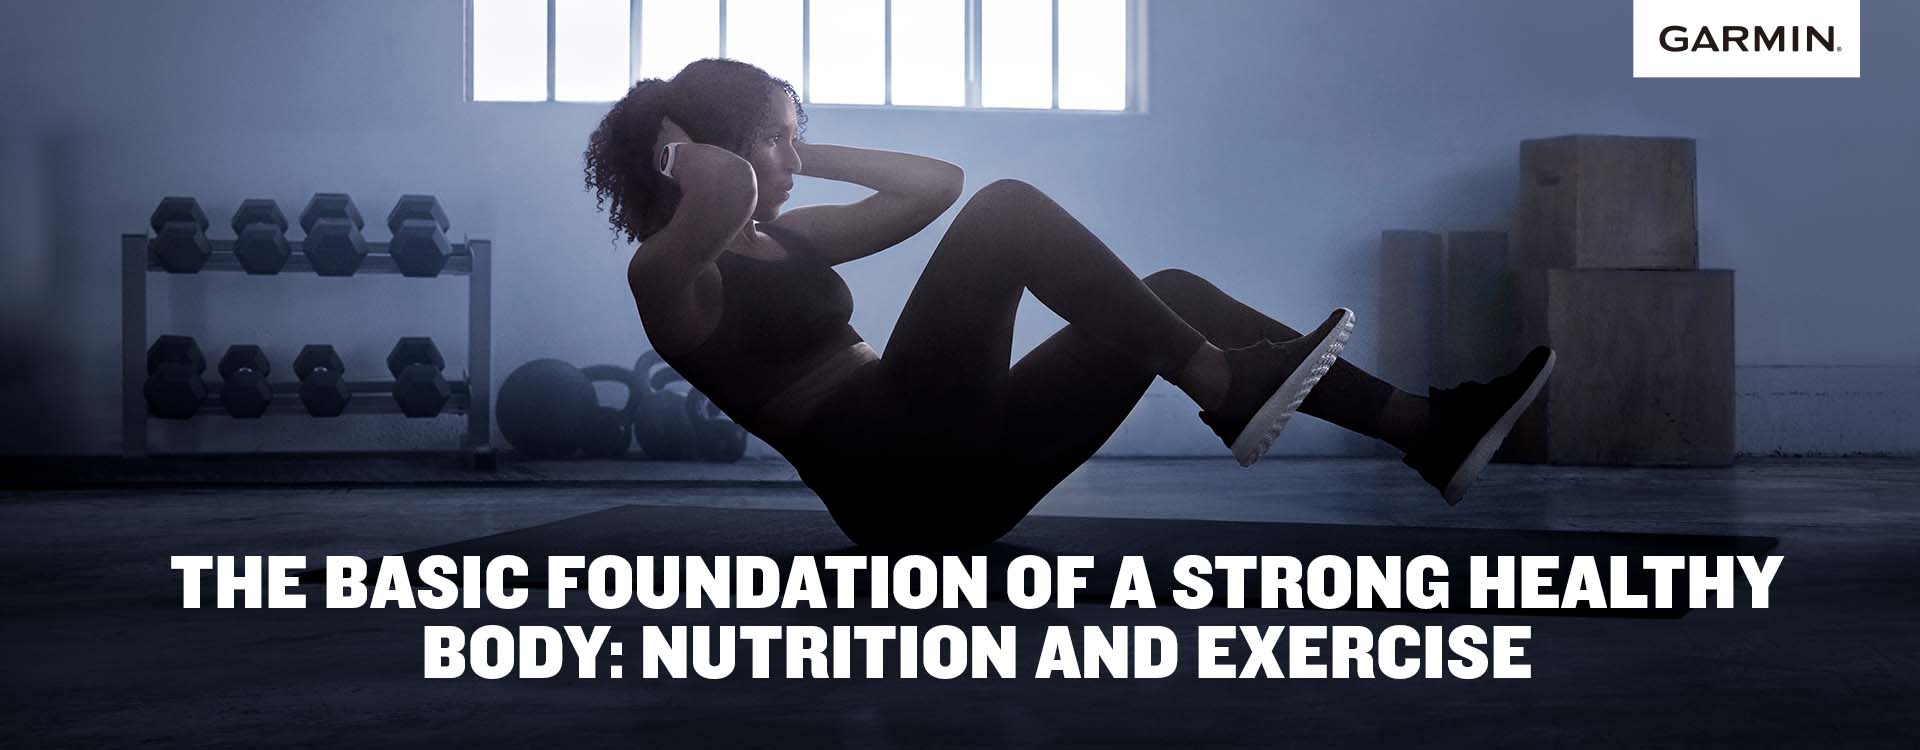 The Basic Foundation of a Strong and Healthy Body: Nutrition and Exercise